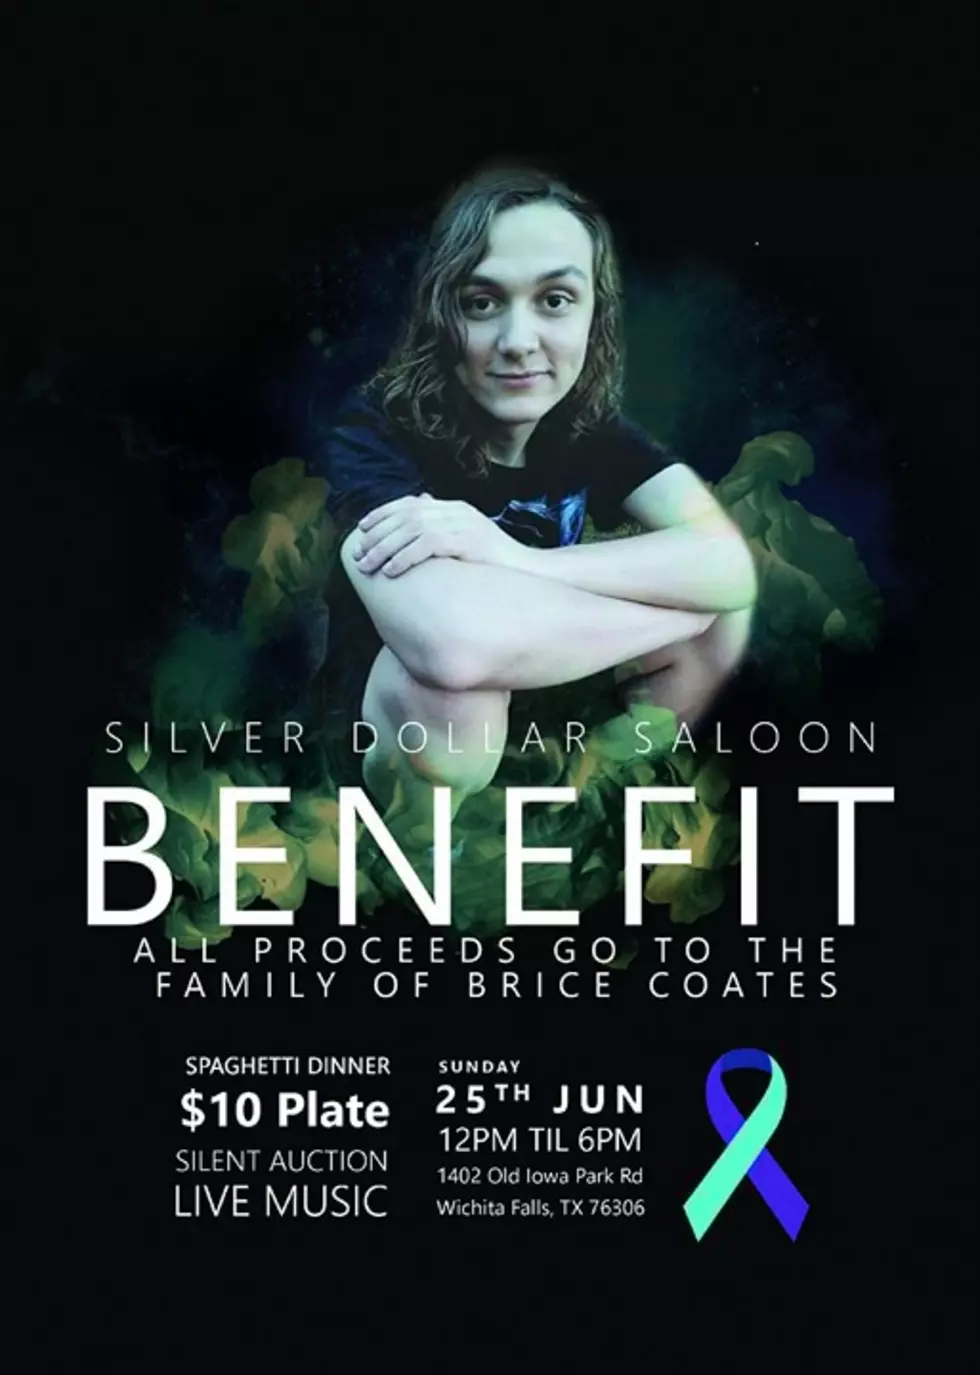 Benefit for Brice Coates Happening in Wichita Falls This Weekend